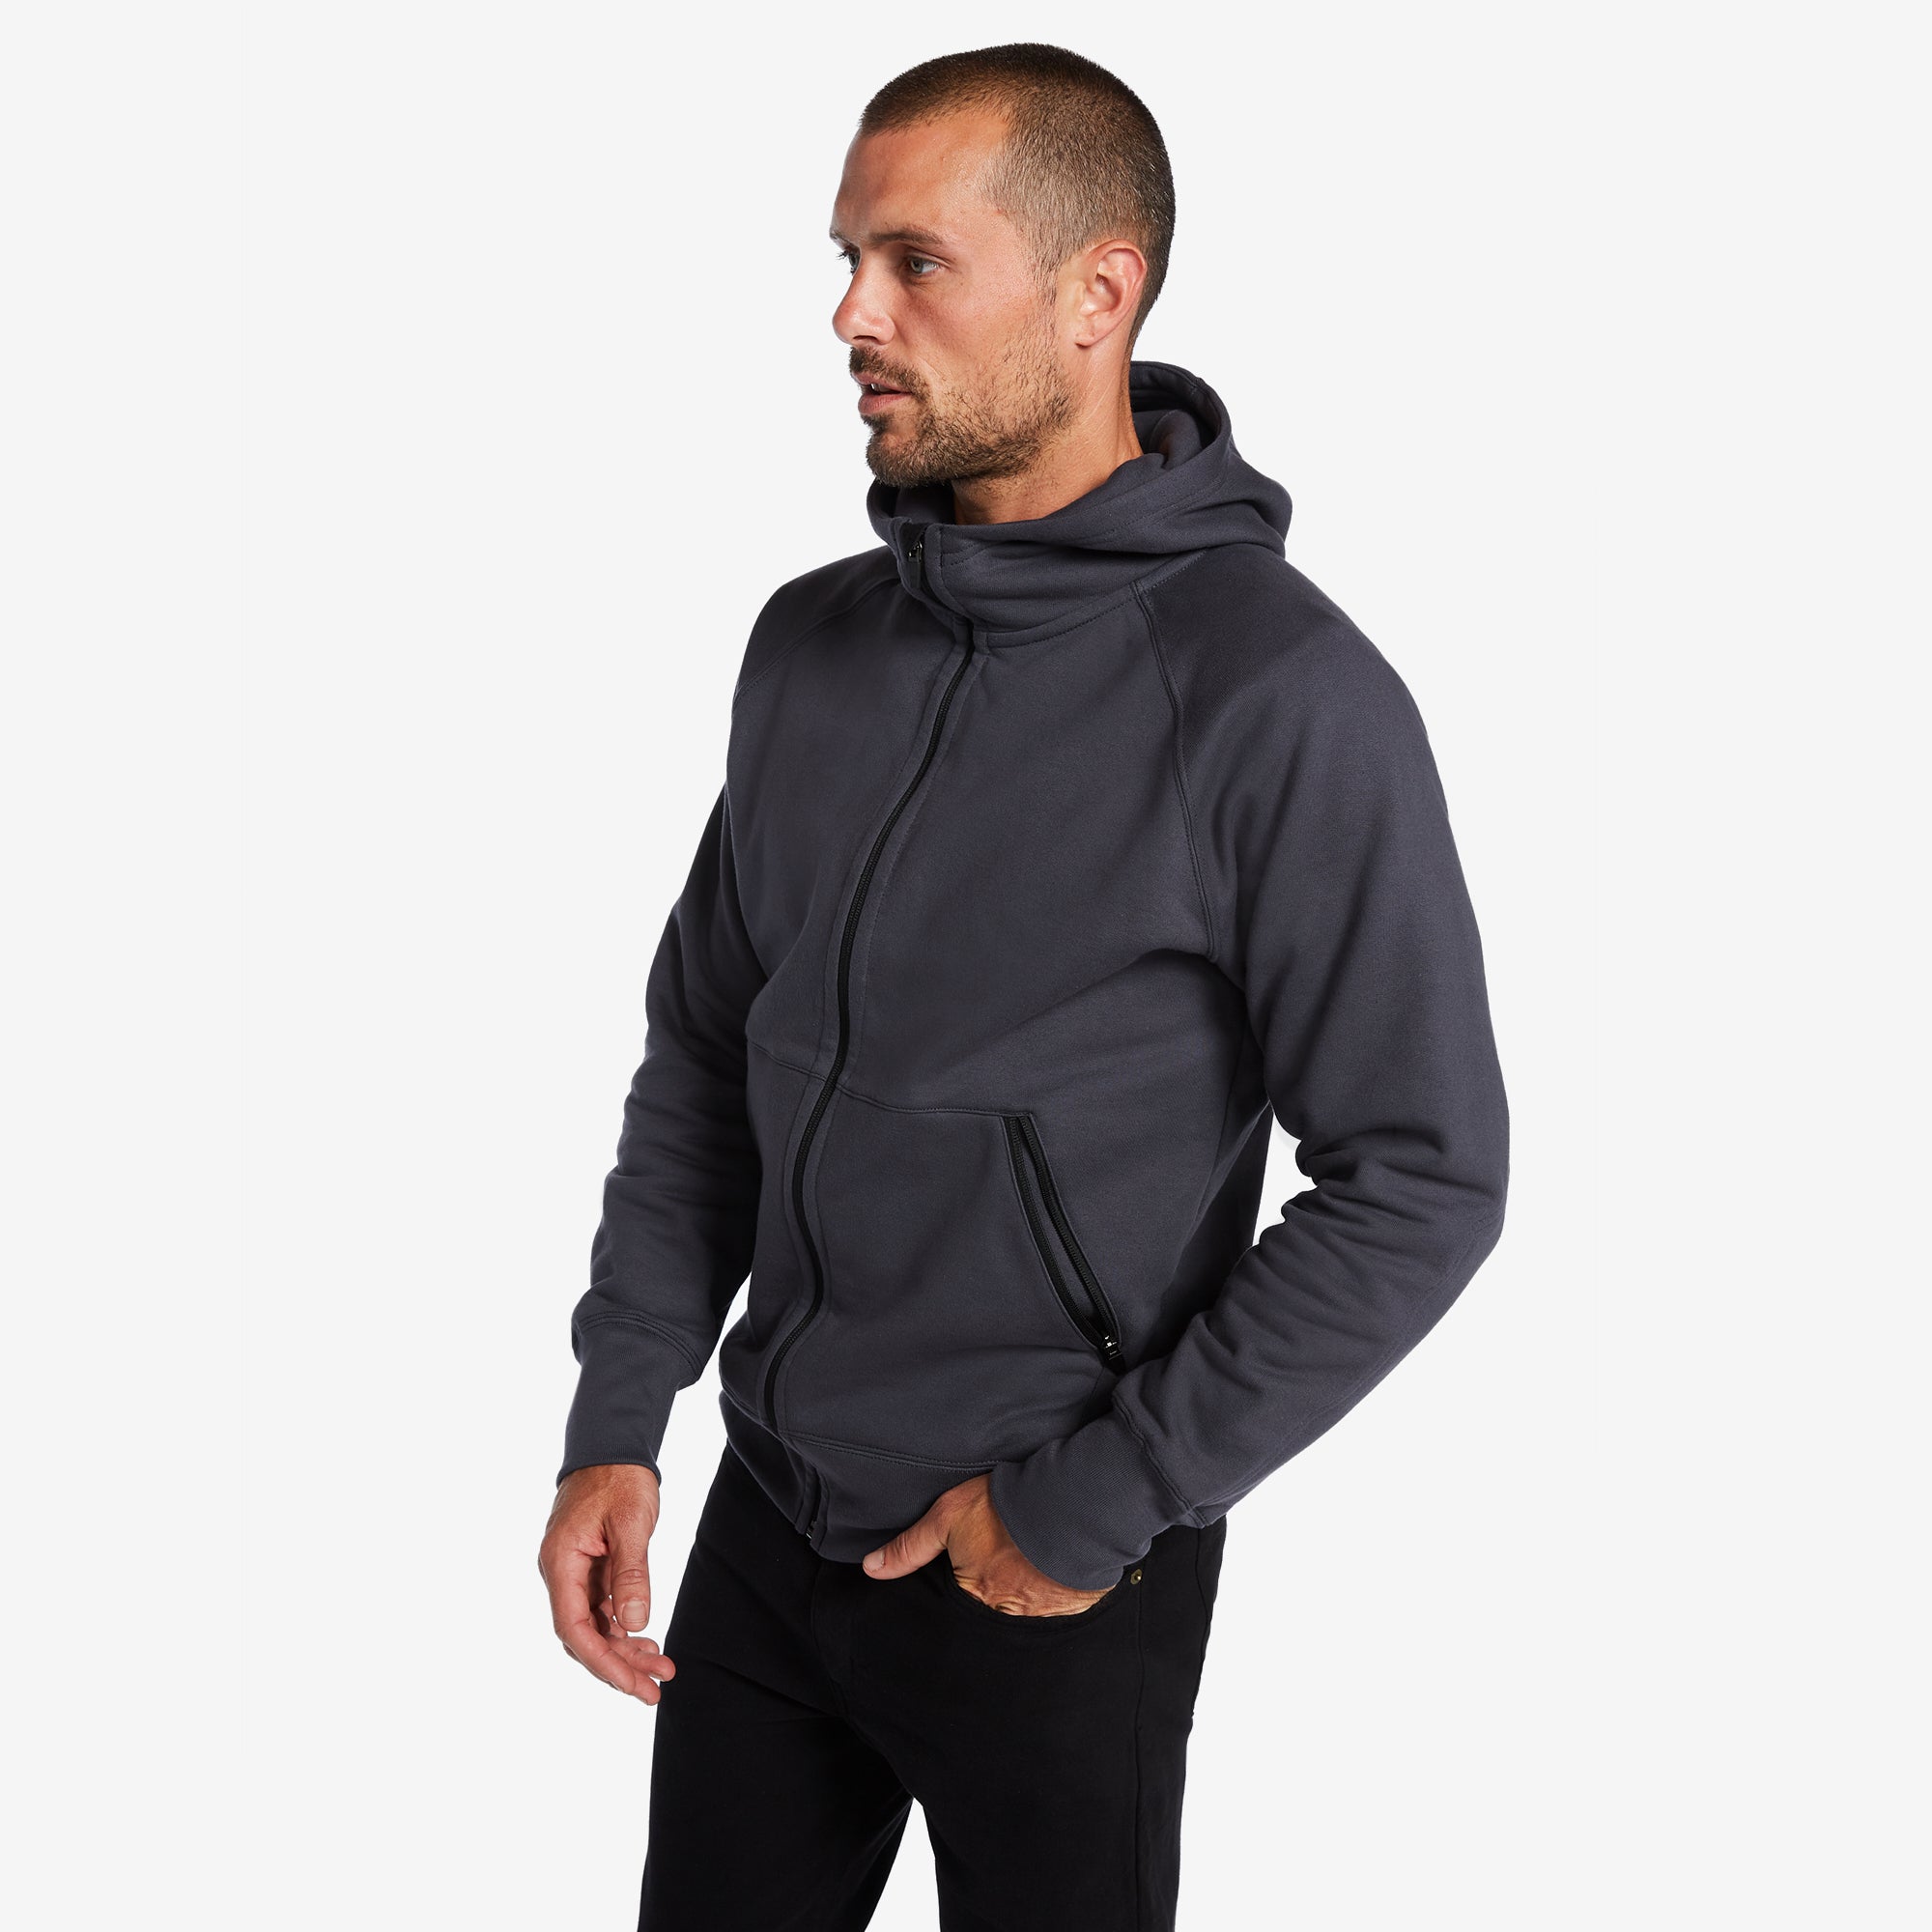 american giant storm hoodie review